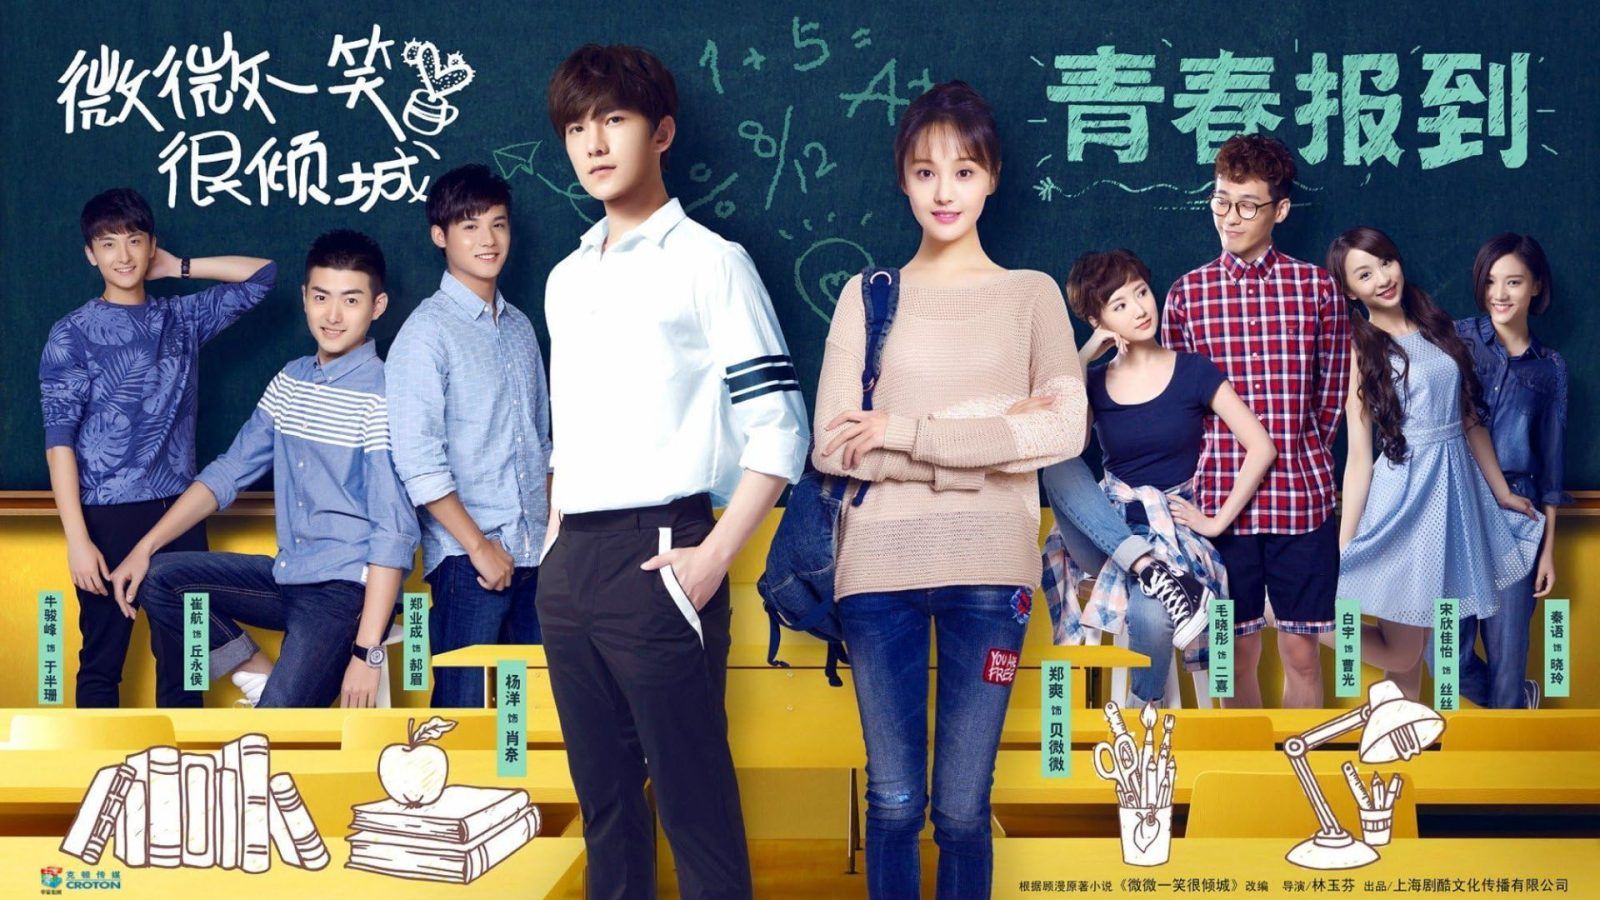 8 Best Chinese Dramas to watch based on novels for your next binge session